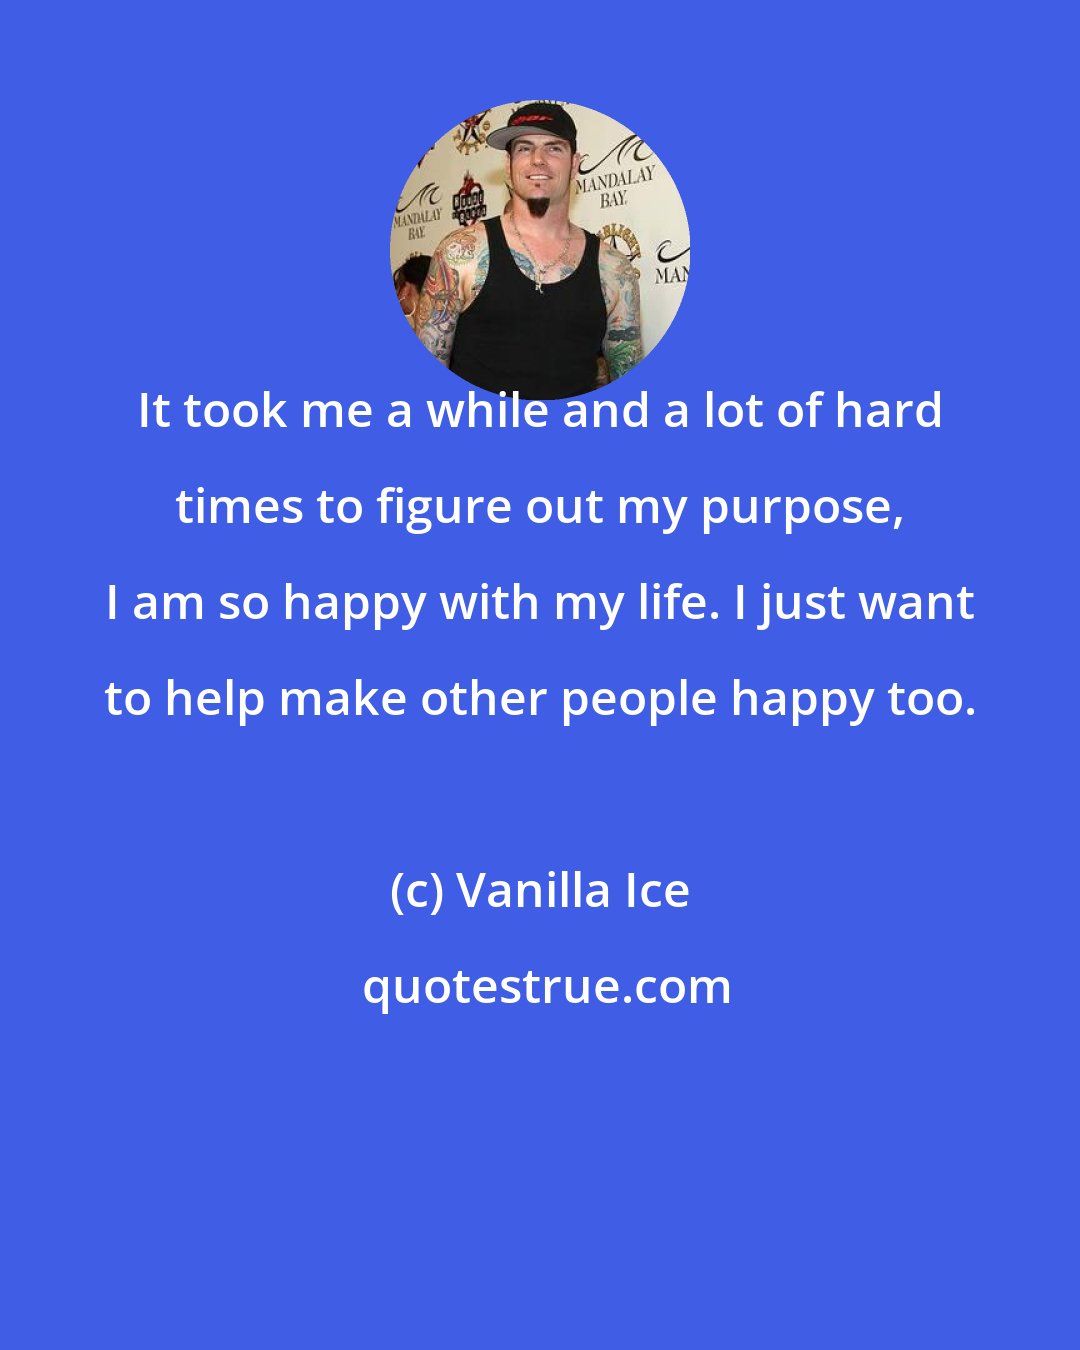 Vanilla Ice: It took me a while and a lot of hard times to figure out my purpose, I am so happy with my life. I just want to help make other people happy too.